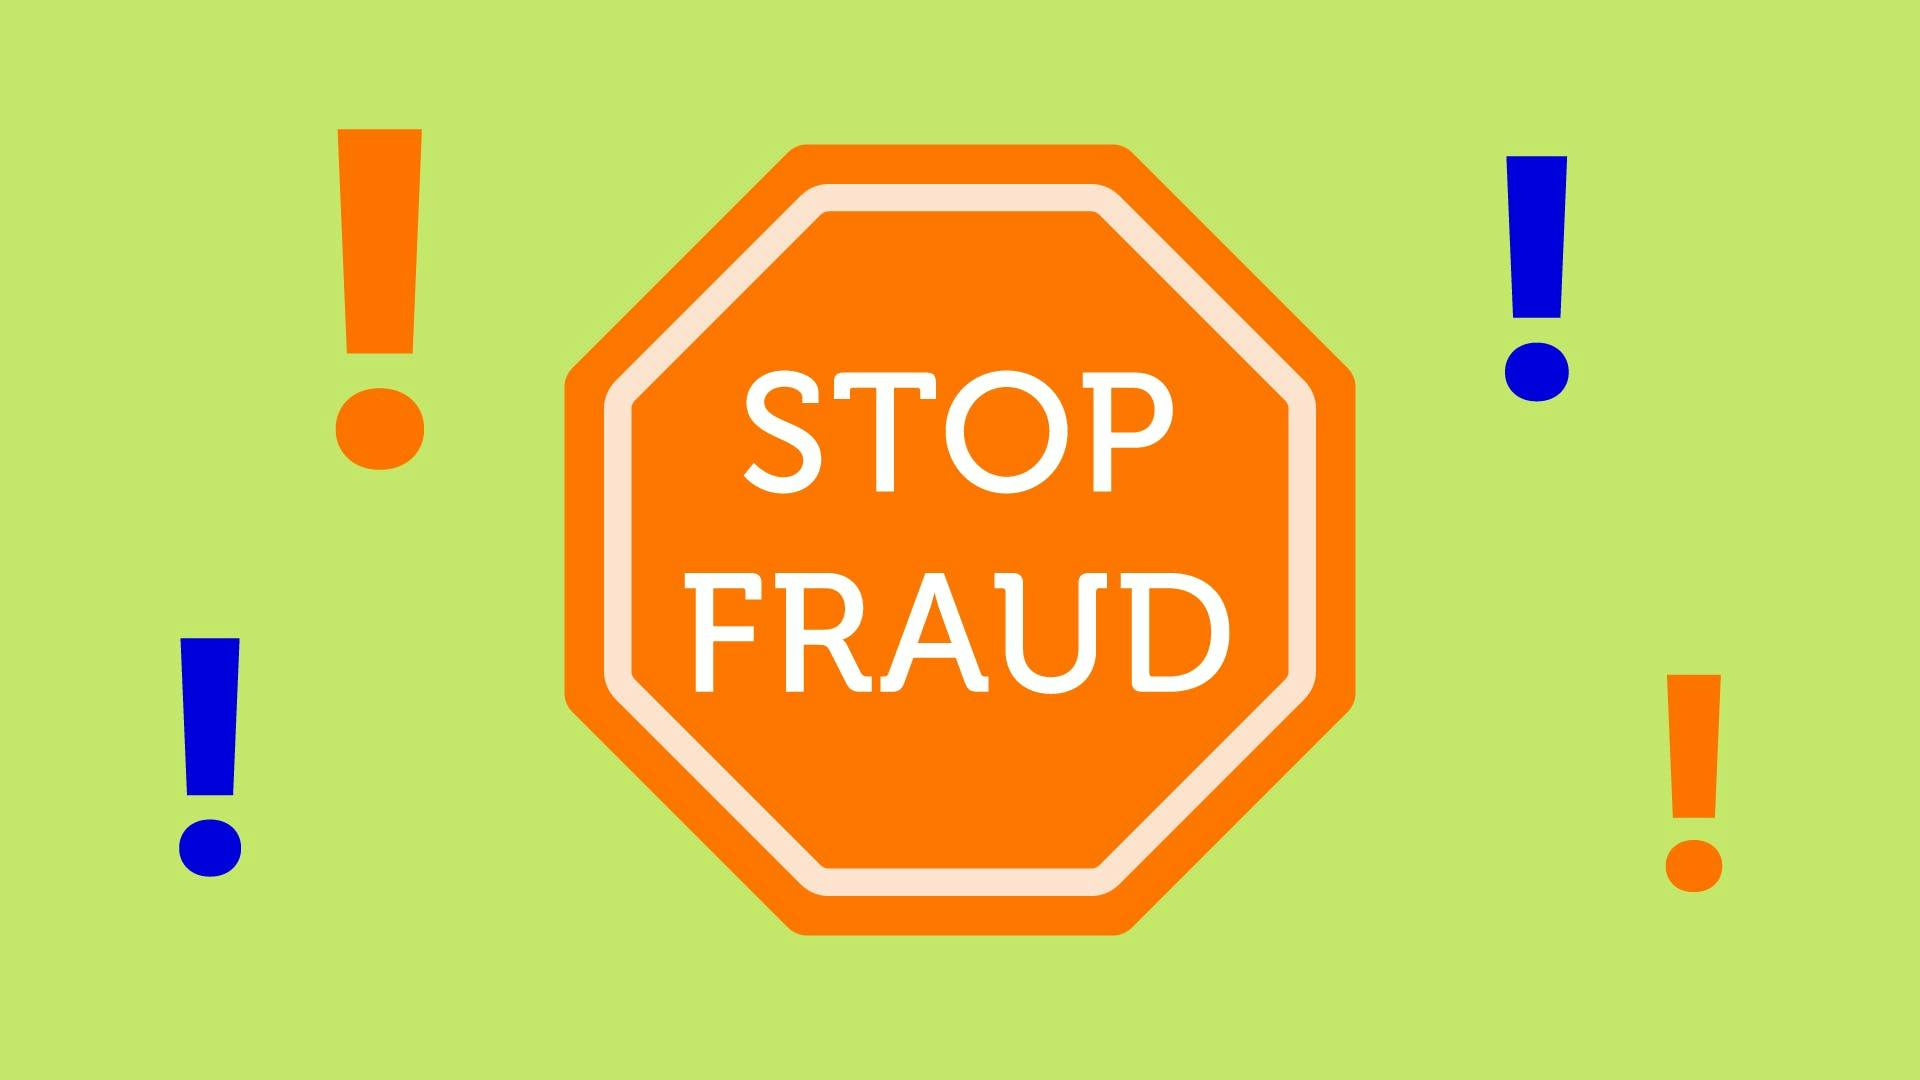 What to do to prevent friendly fraud